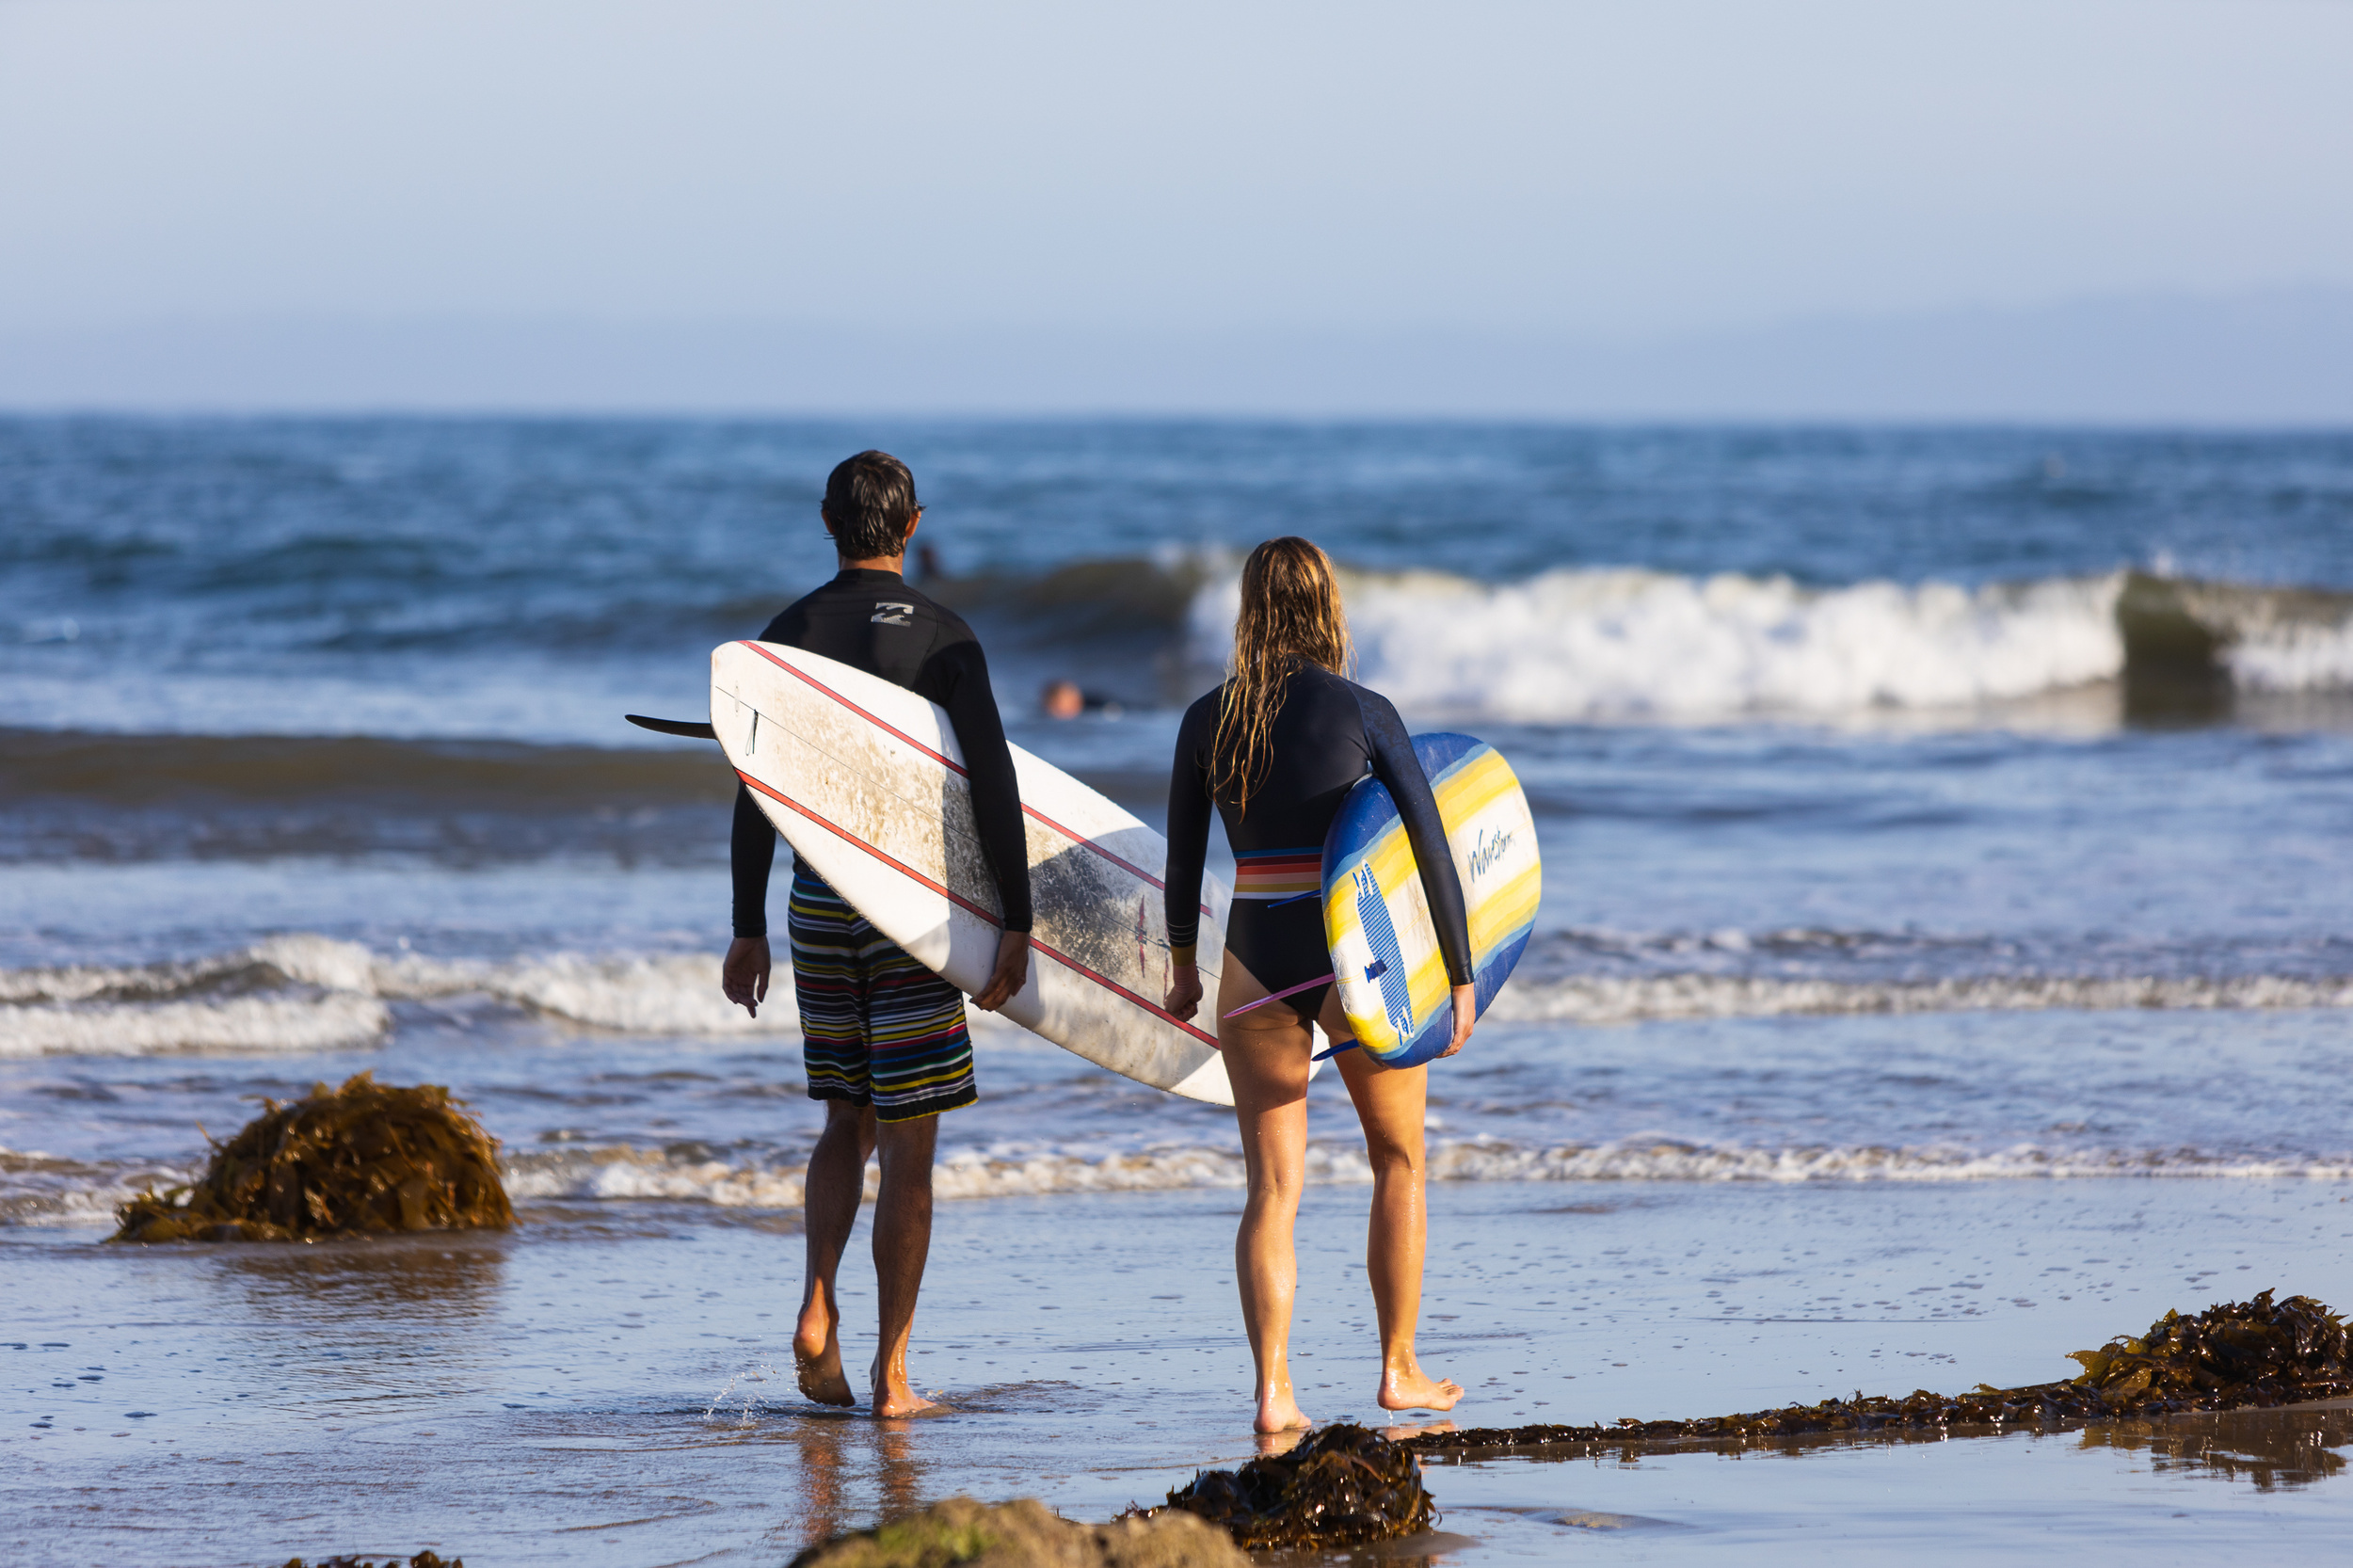 <p>Southern California is the ideal domestic escape — year-round sun and sand. And Santa Barbara is much more suited to those in love than bustling LA. Rent a beach house, enjoy the wonderful weather, and drink local wine!</p><p>You may also like: <a href='https://www.yardbarker.com/lifestyle/articles/24_things_you_didnt_know_about_subway_012924/s1__39859605'>24 things you didn’t know about Subway</a></p>